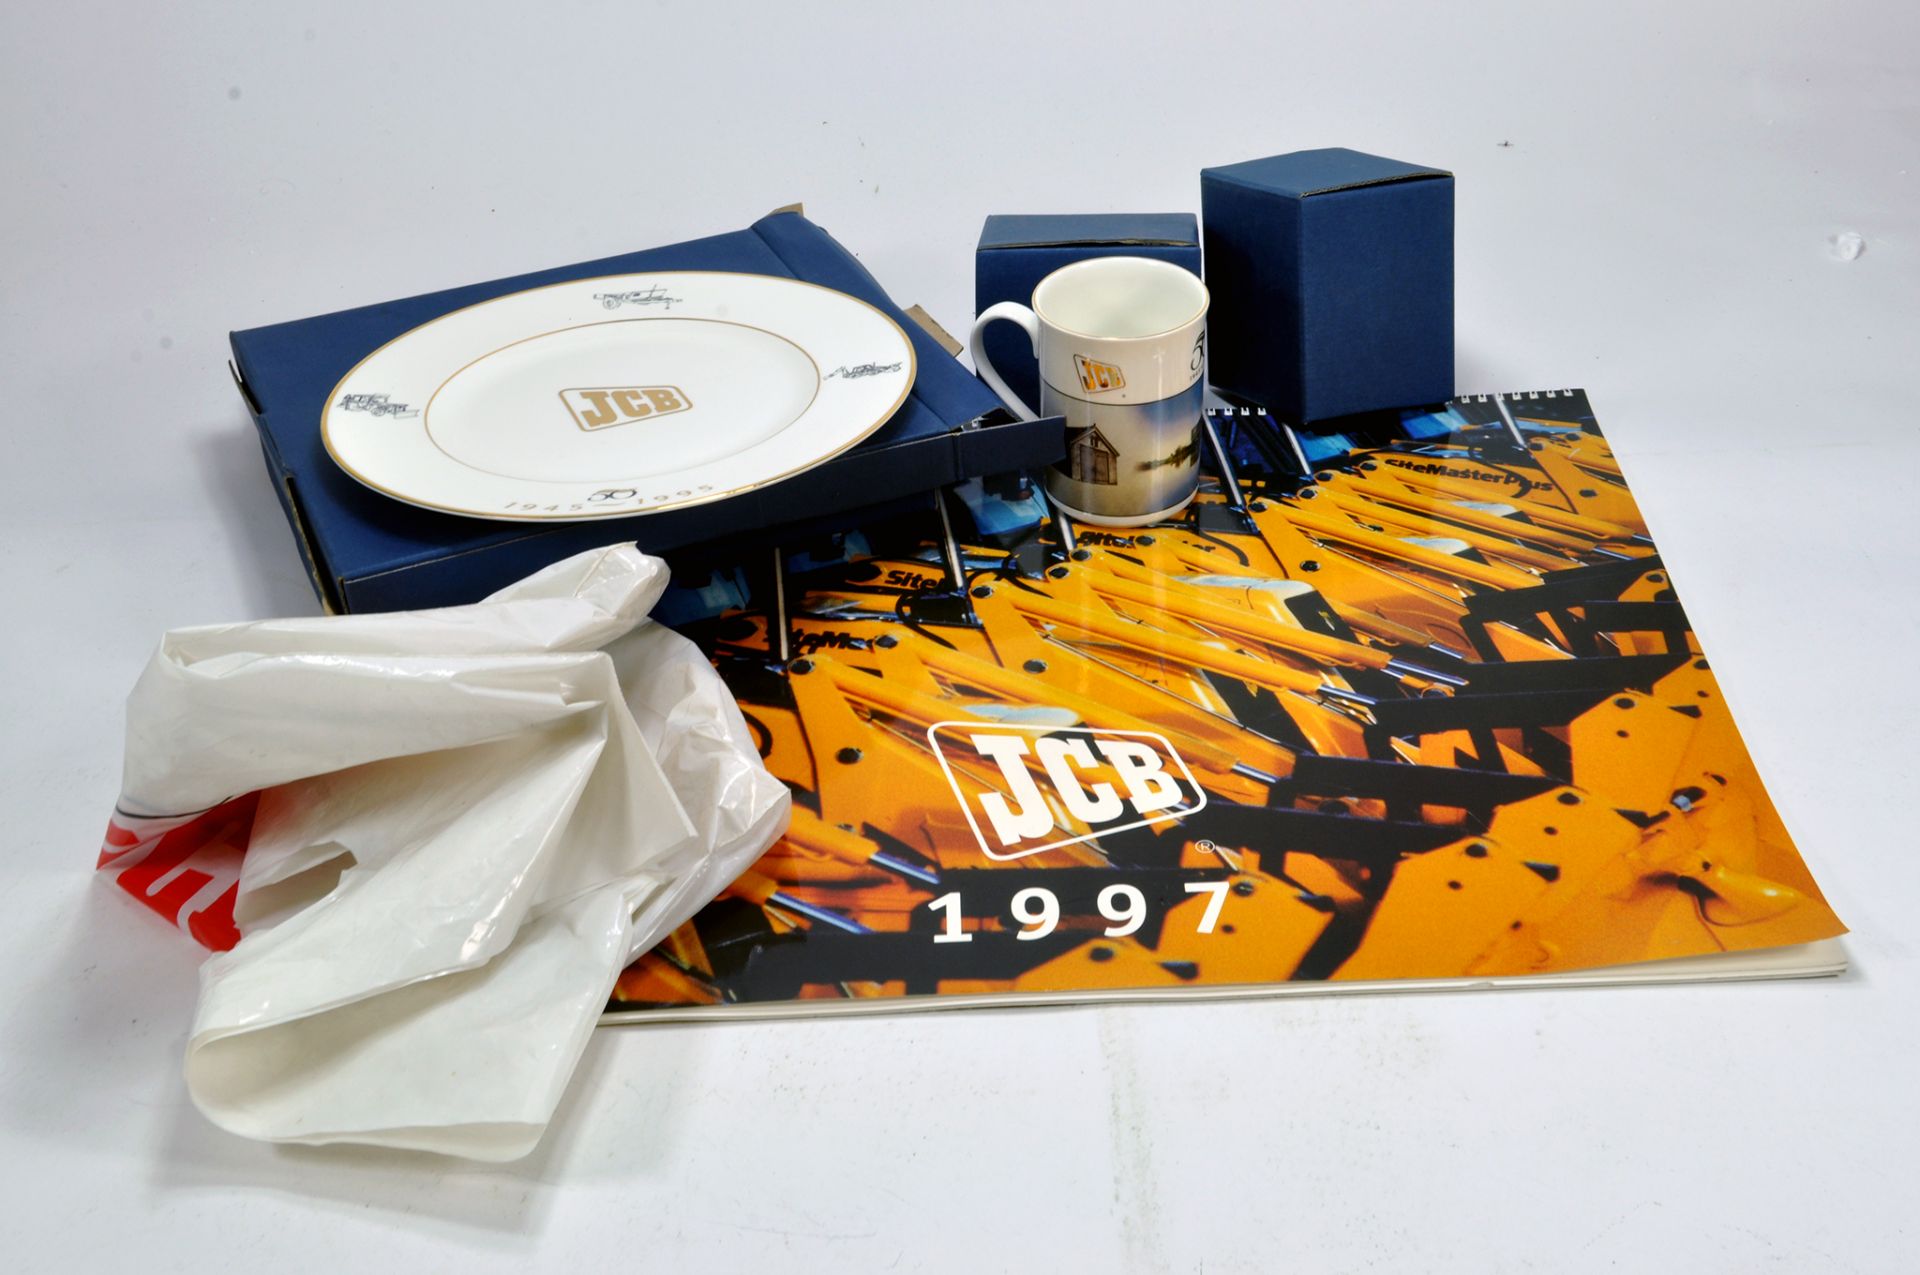 Assortment of JCB Sales and Promotional paraphenalia.